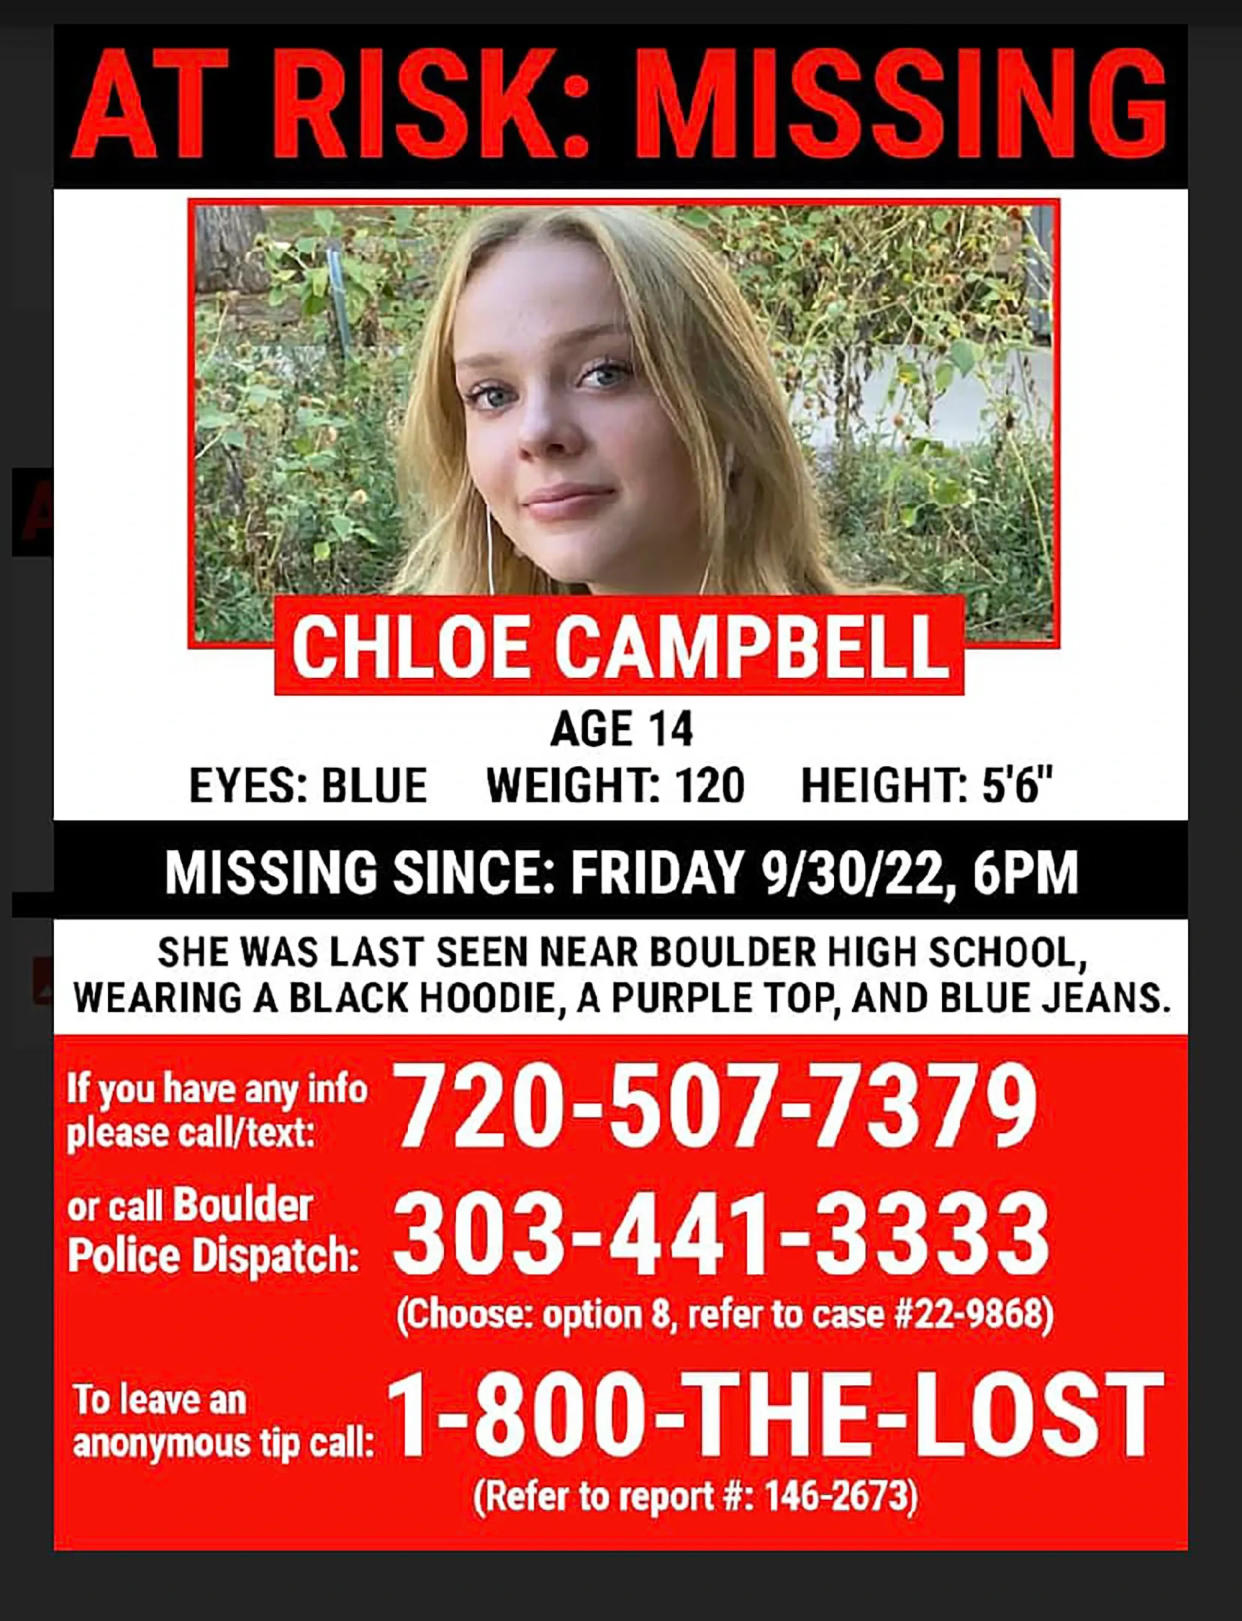 Missing teen Chloe Campbell has been found alive and well. Authorities believe she ran away from home.